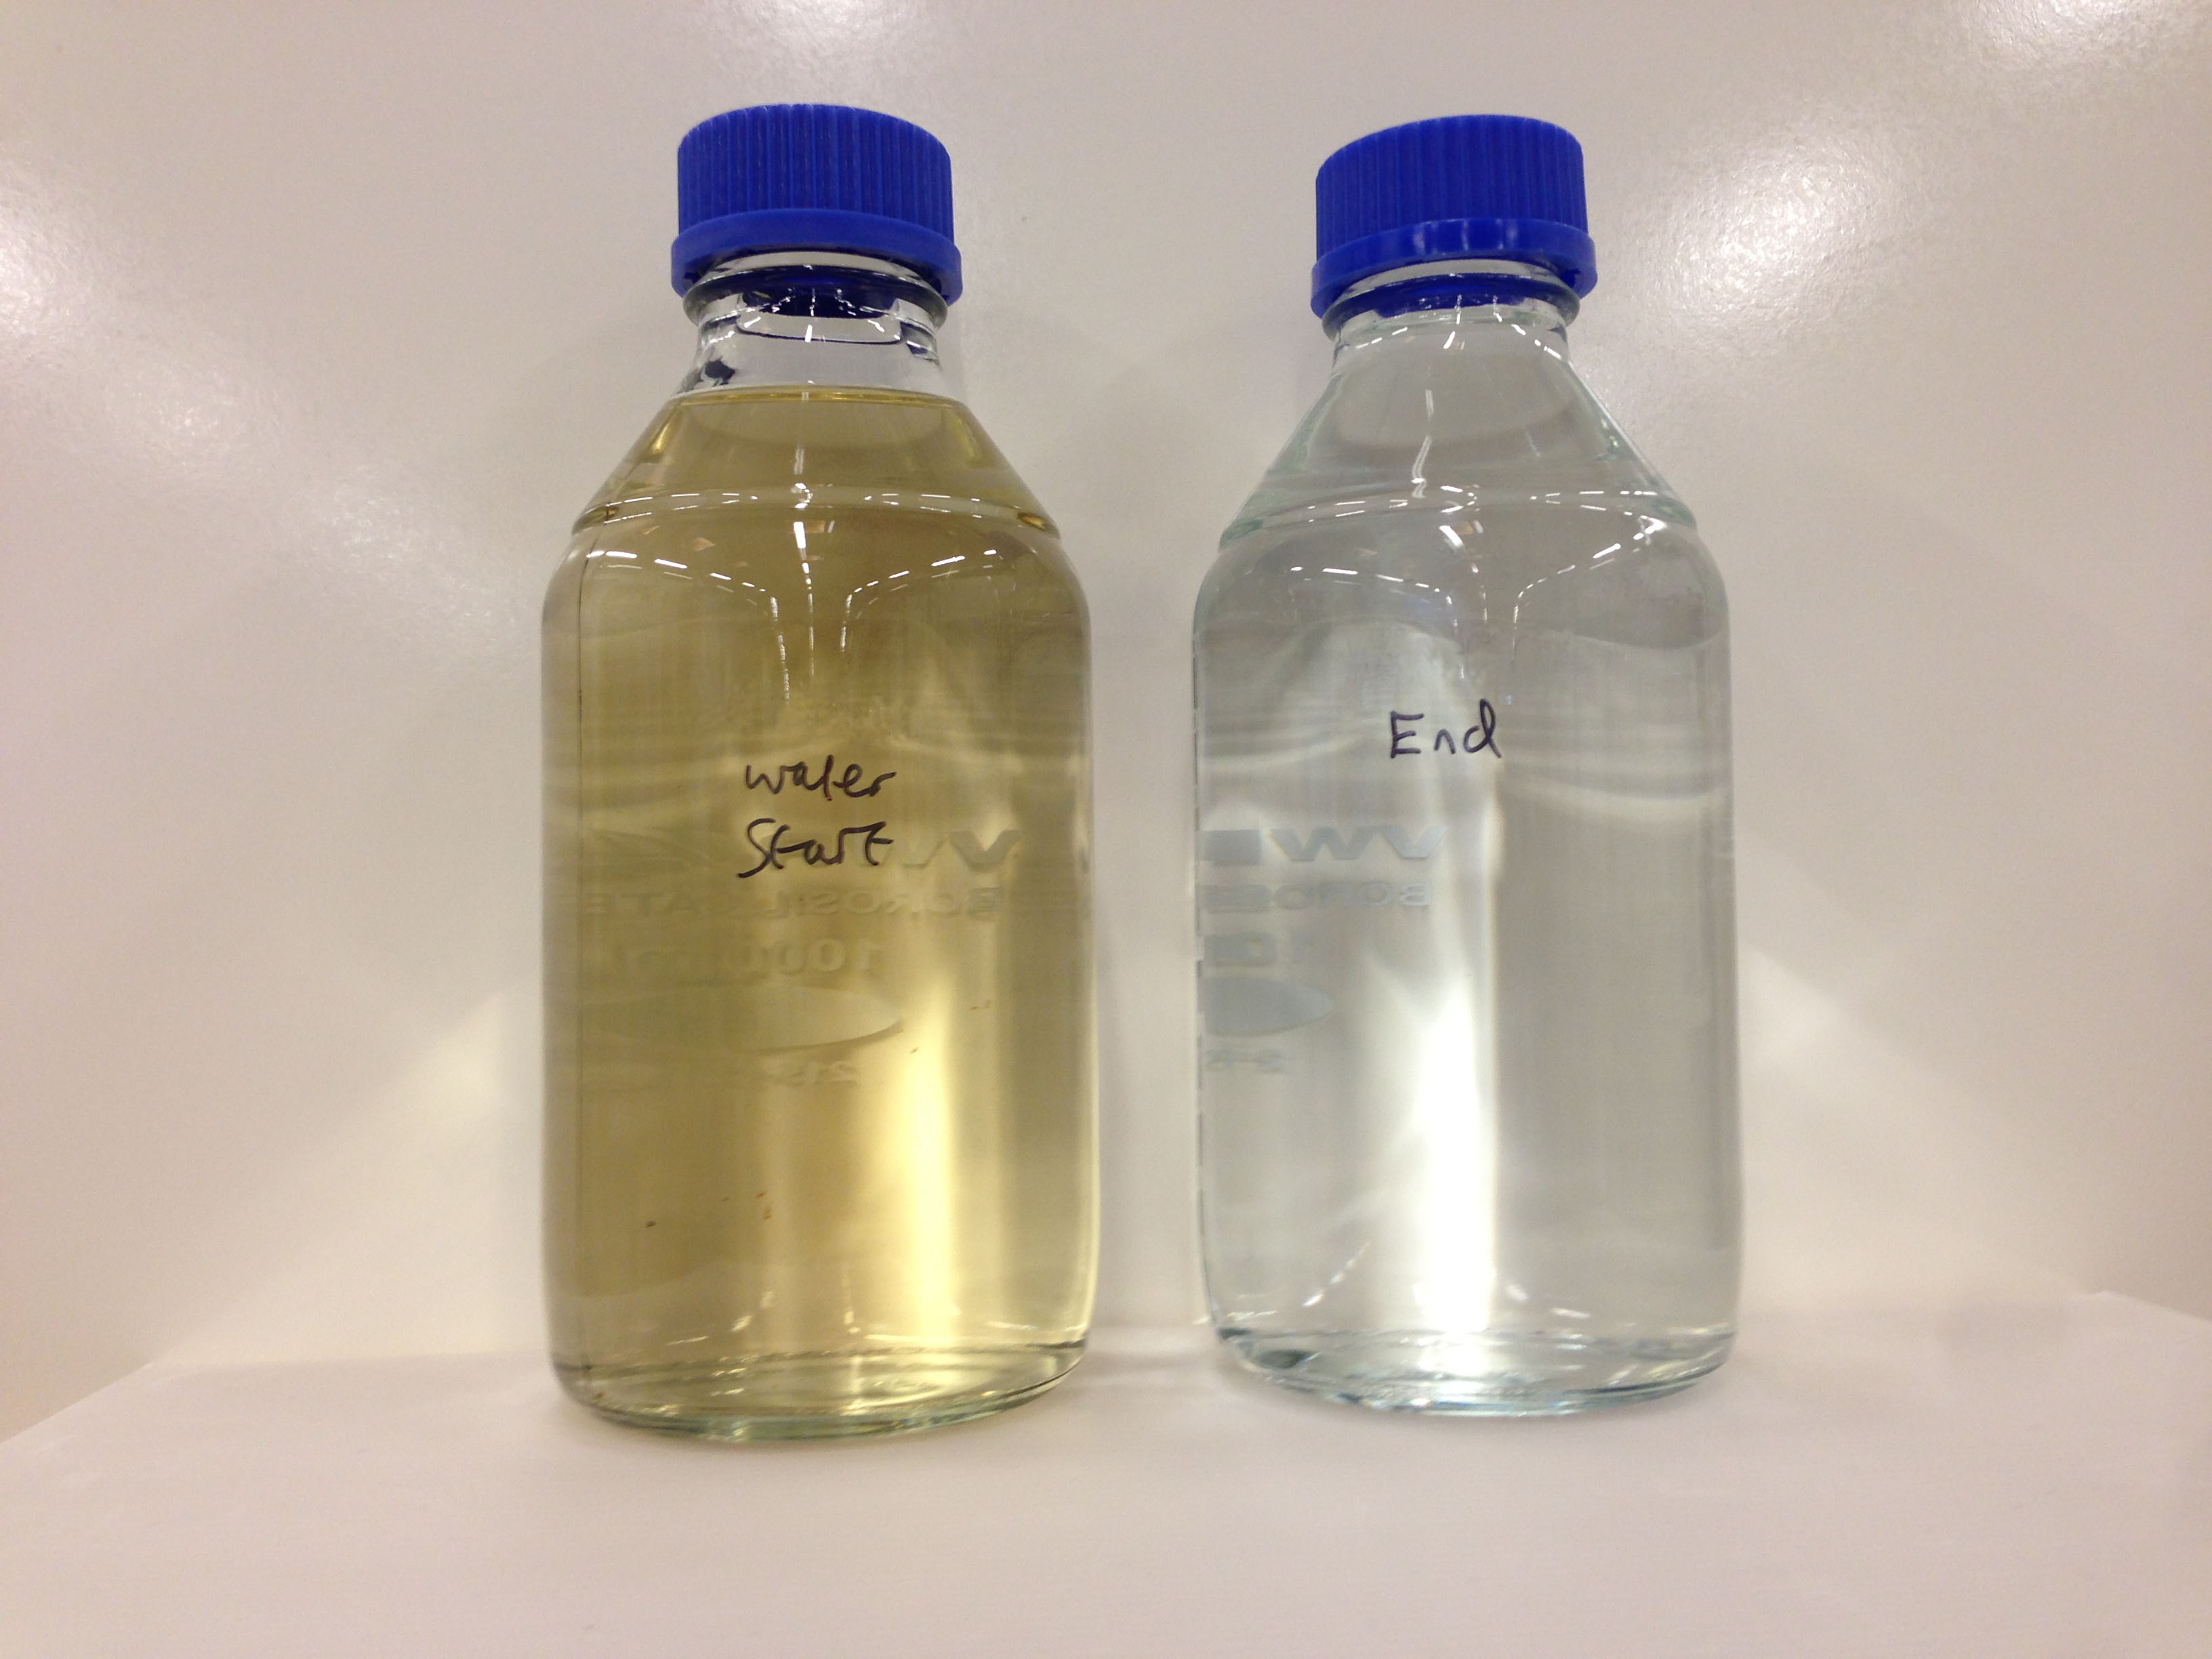 Water samples from before and after treatment on the laboratory-scale Nyex system.